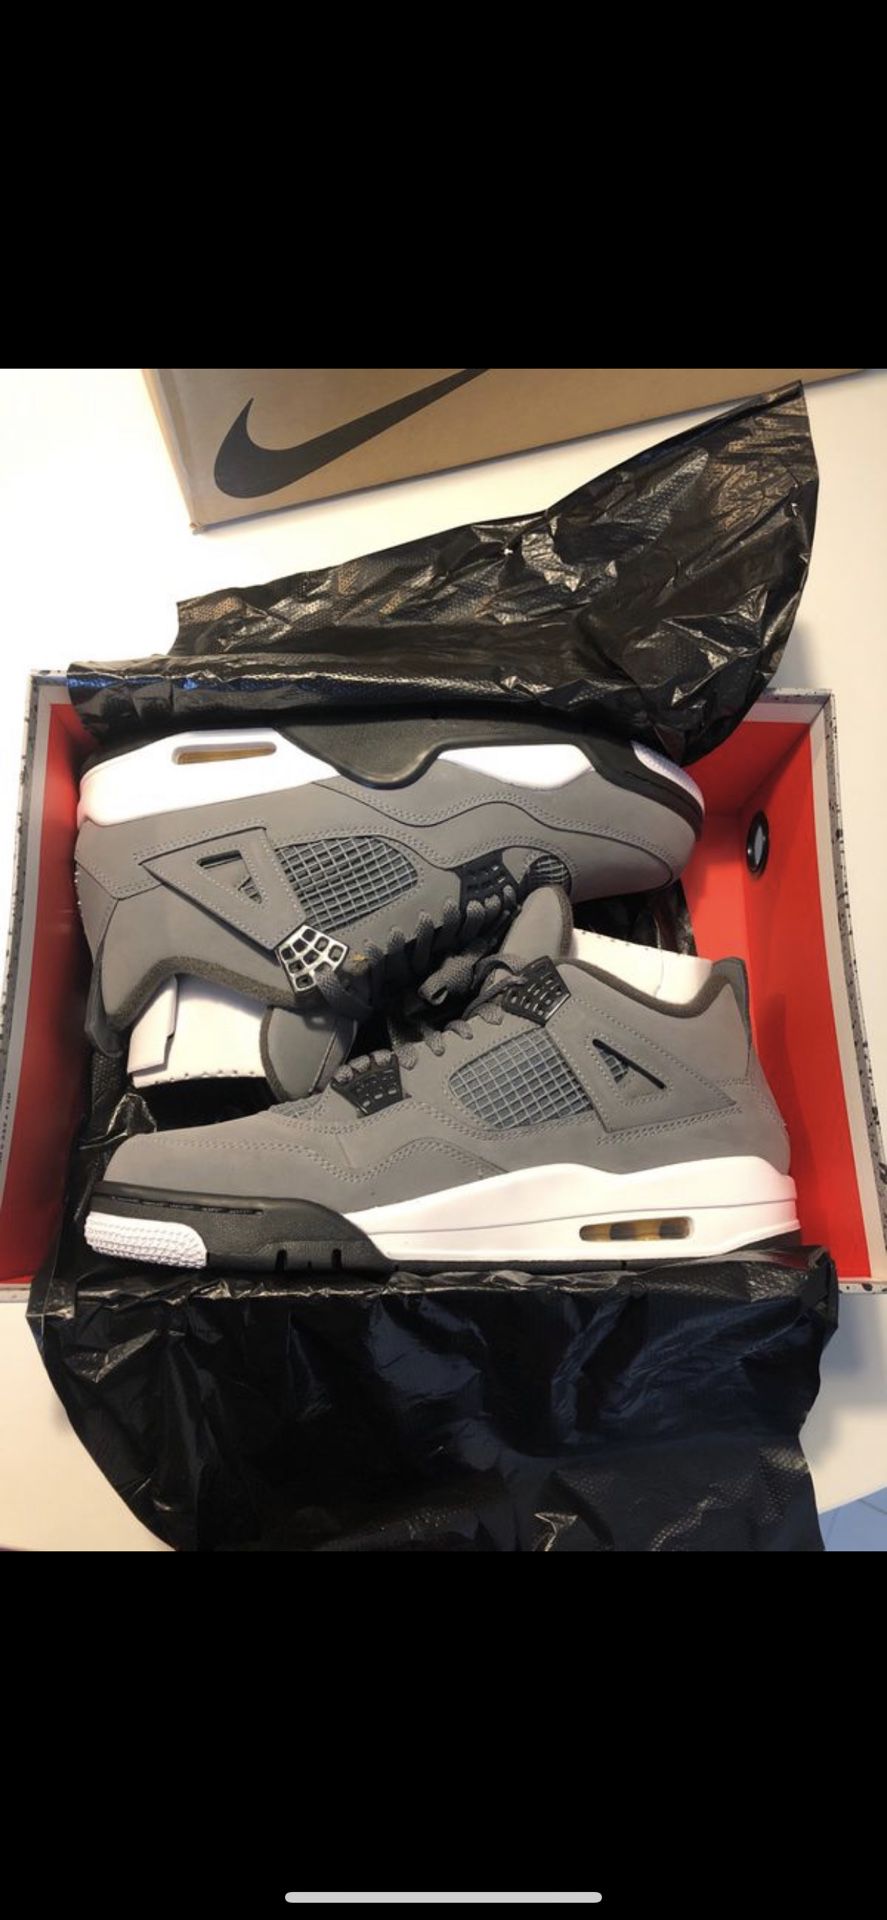 Cool grey 4 size 11 worn once VVVNDS Spoken for will delete after I meet person today 9/16